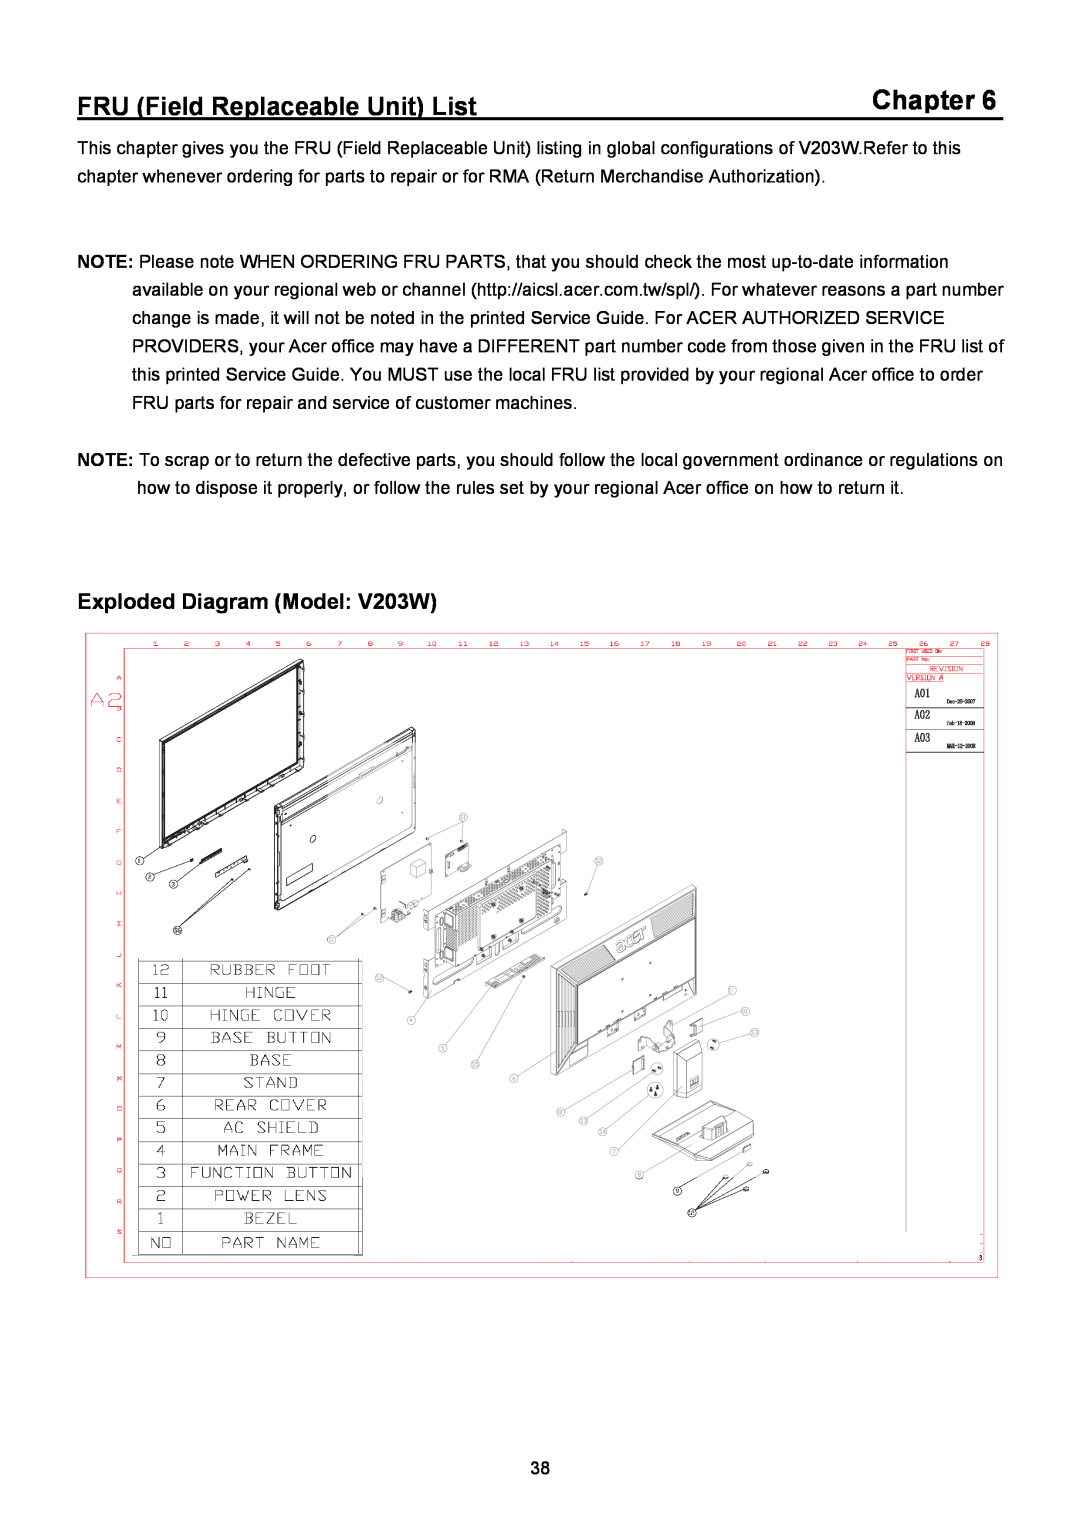 Acer manual Chapter, FRU Field Replaceable Unit List, Exploded Diagram Model V203W 